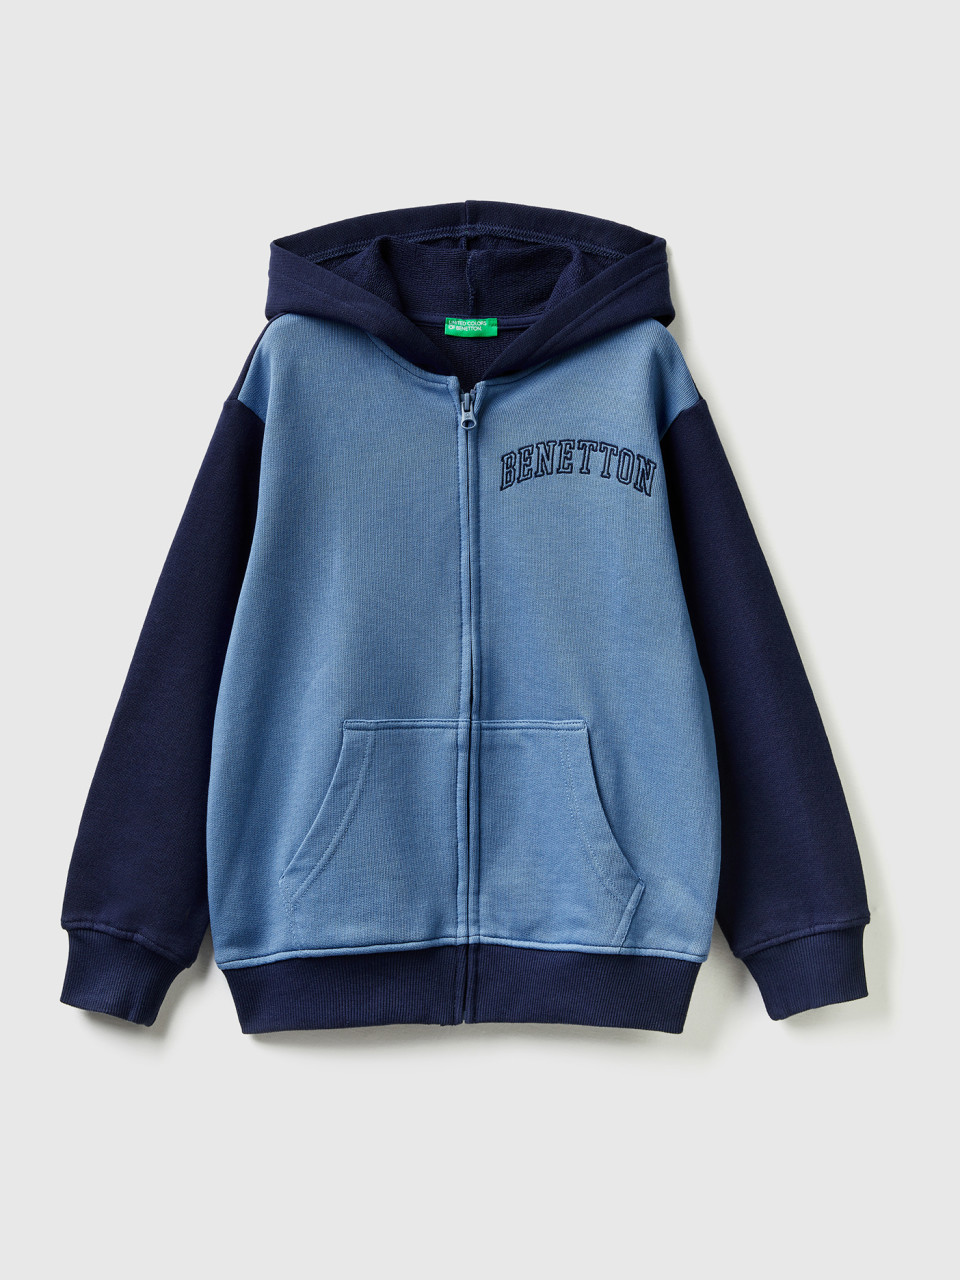 Benetton, Hoodie With Zip And Embroidered Logo, Multi-color, Kids